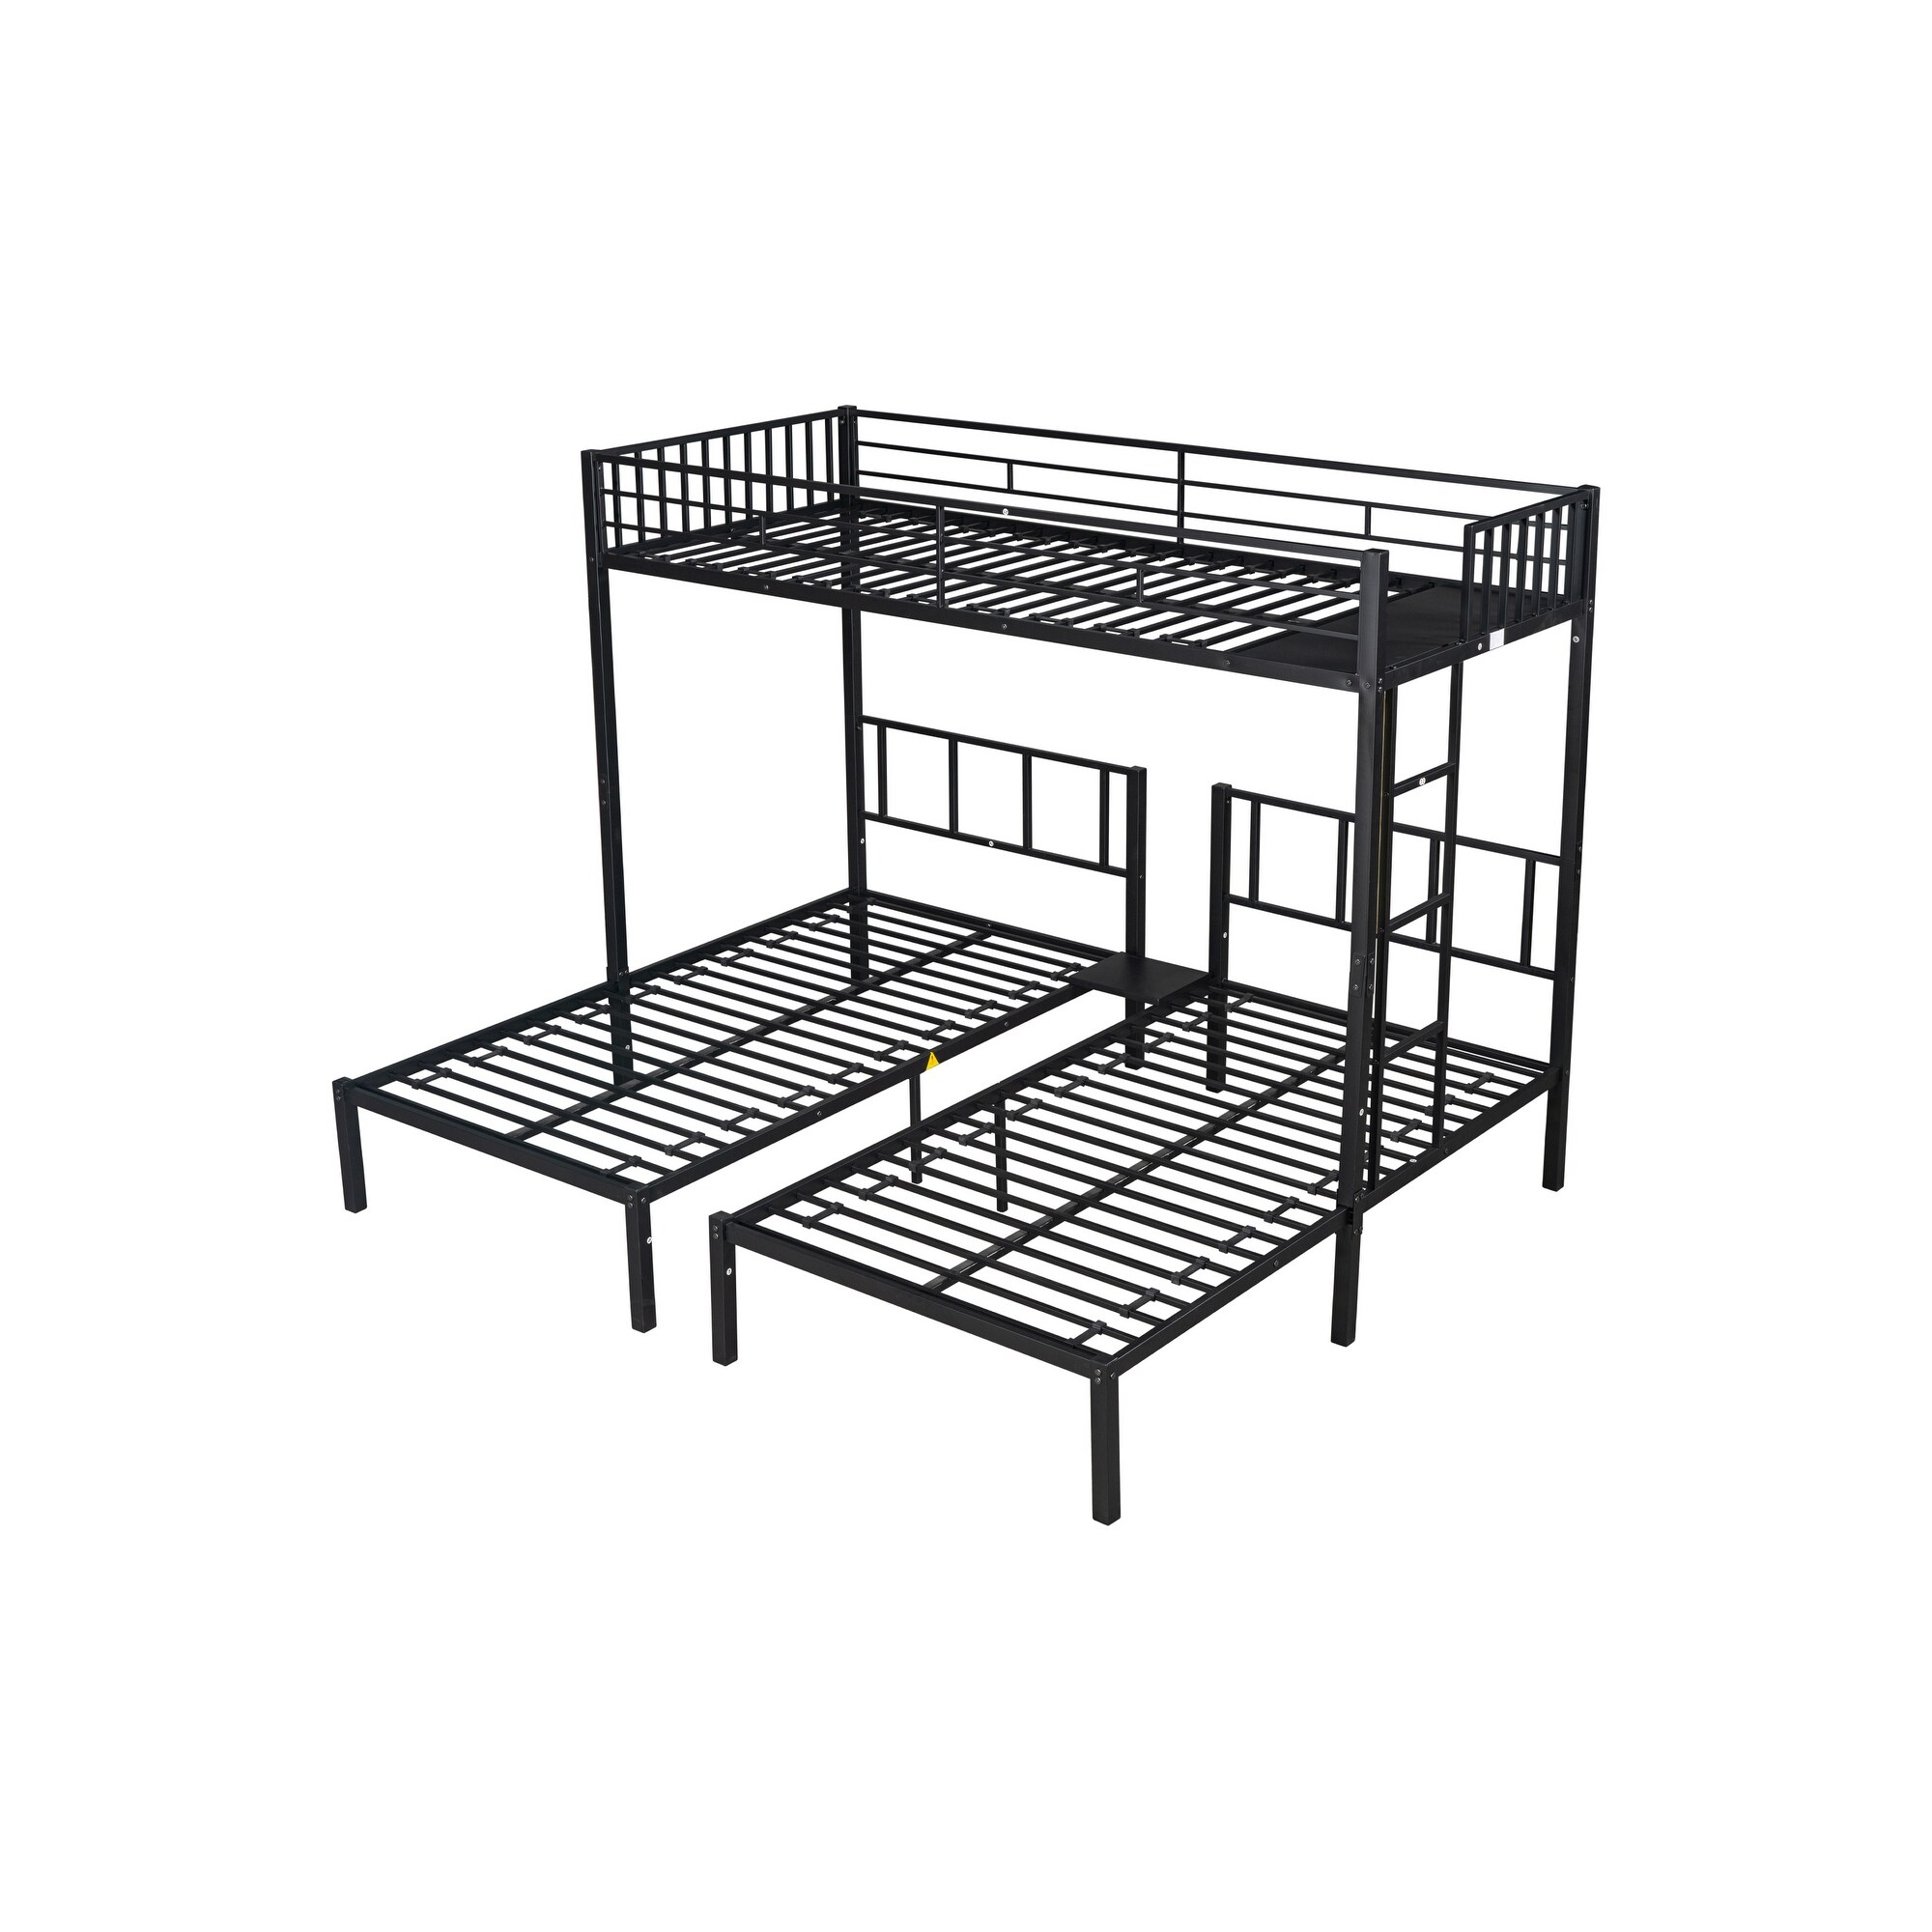 Triple twin bunk bed, can be separated into 3 twin beds